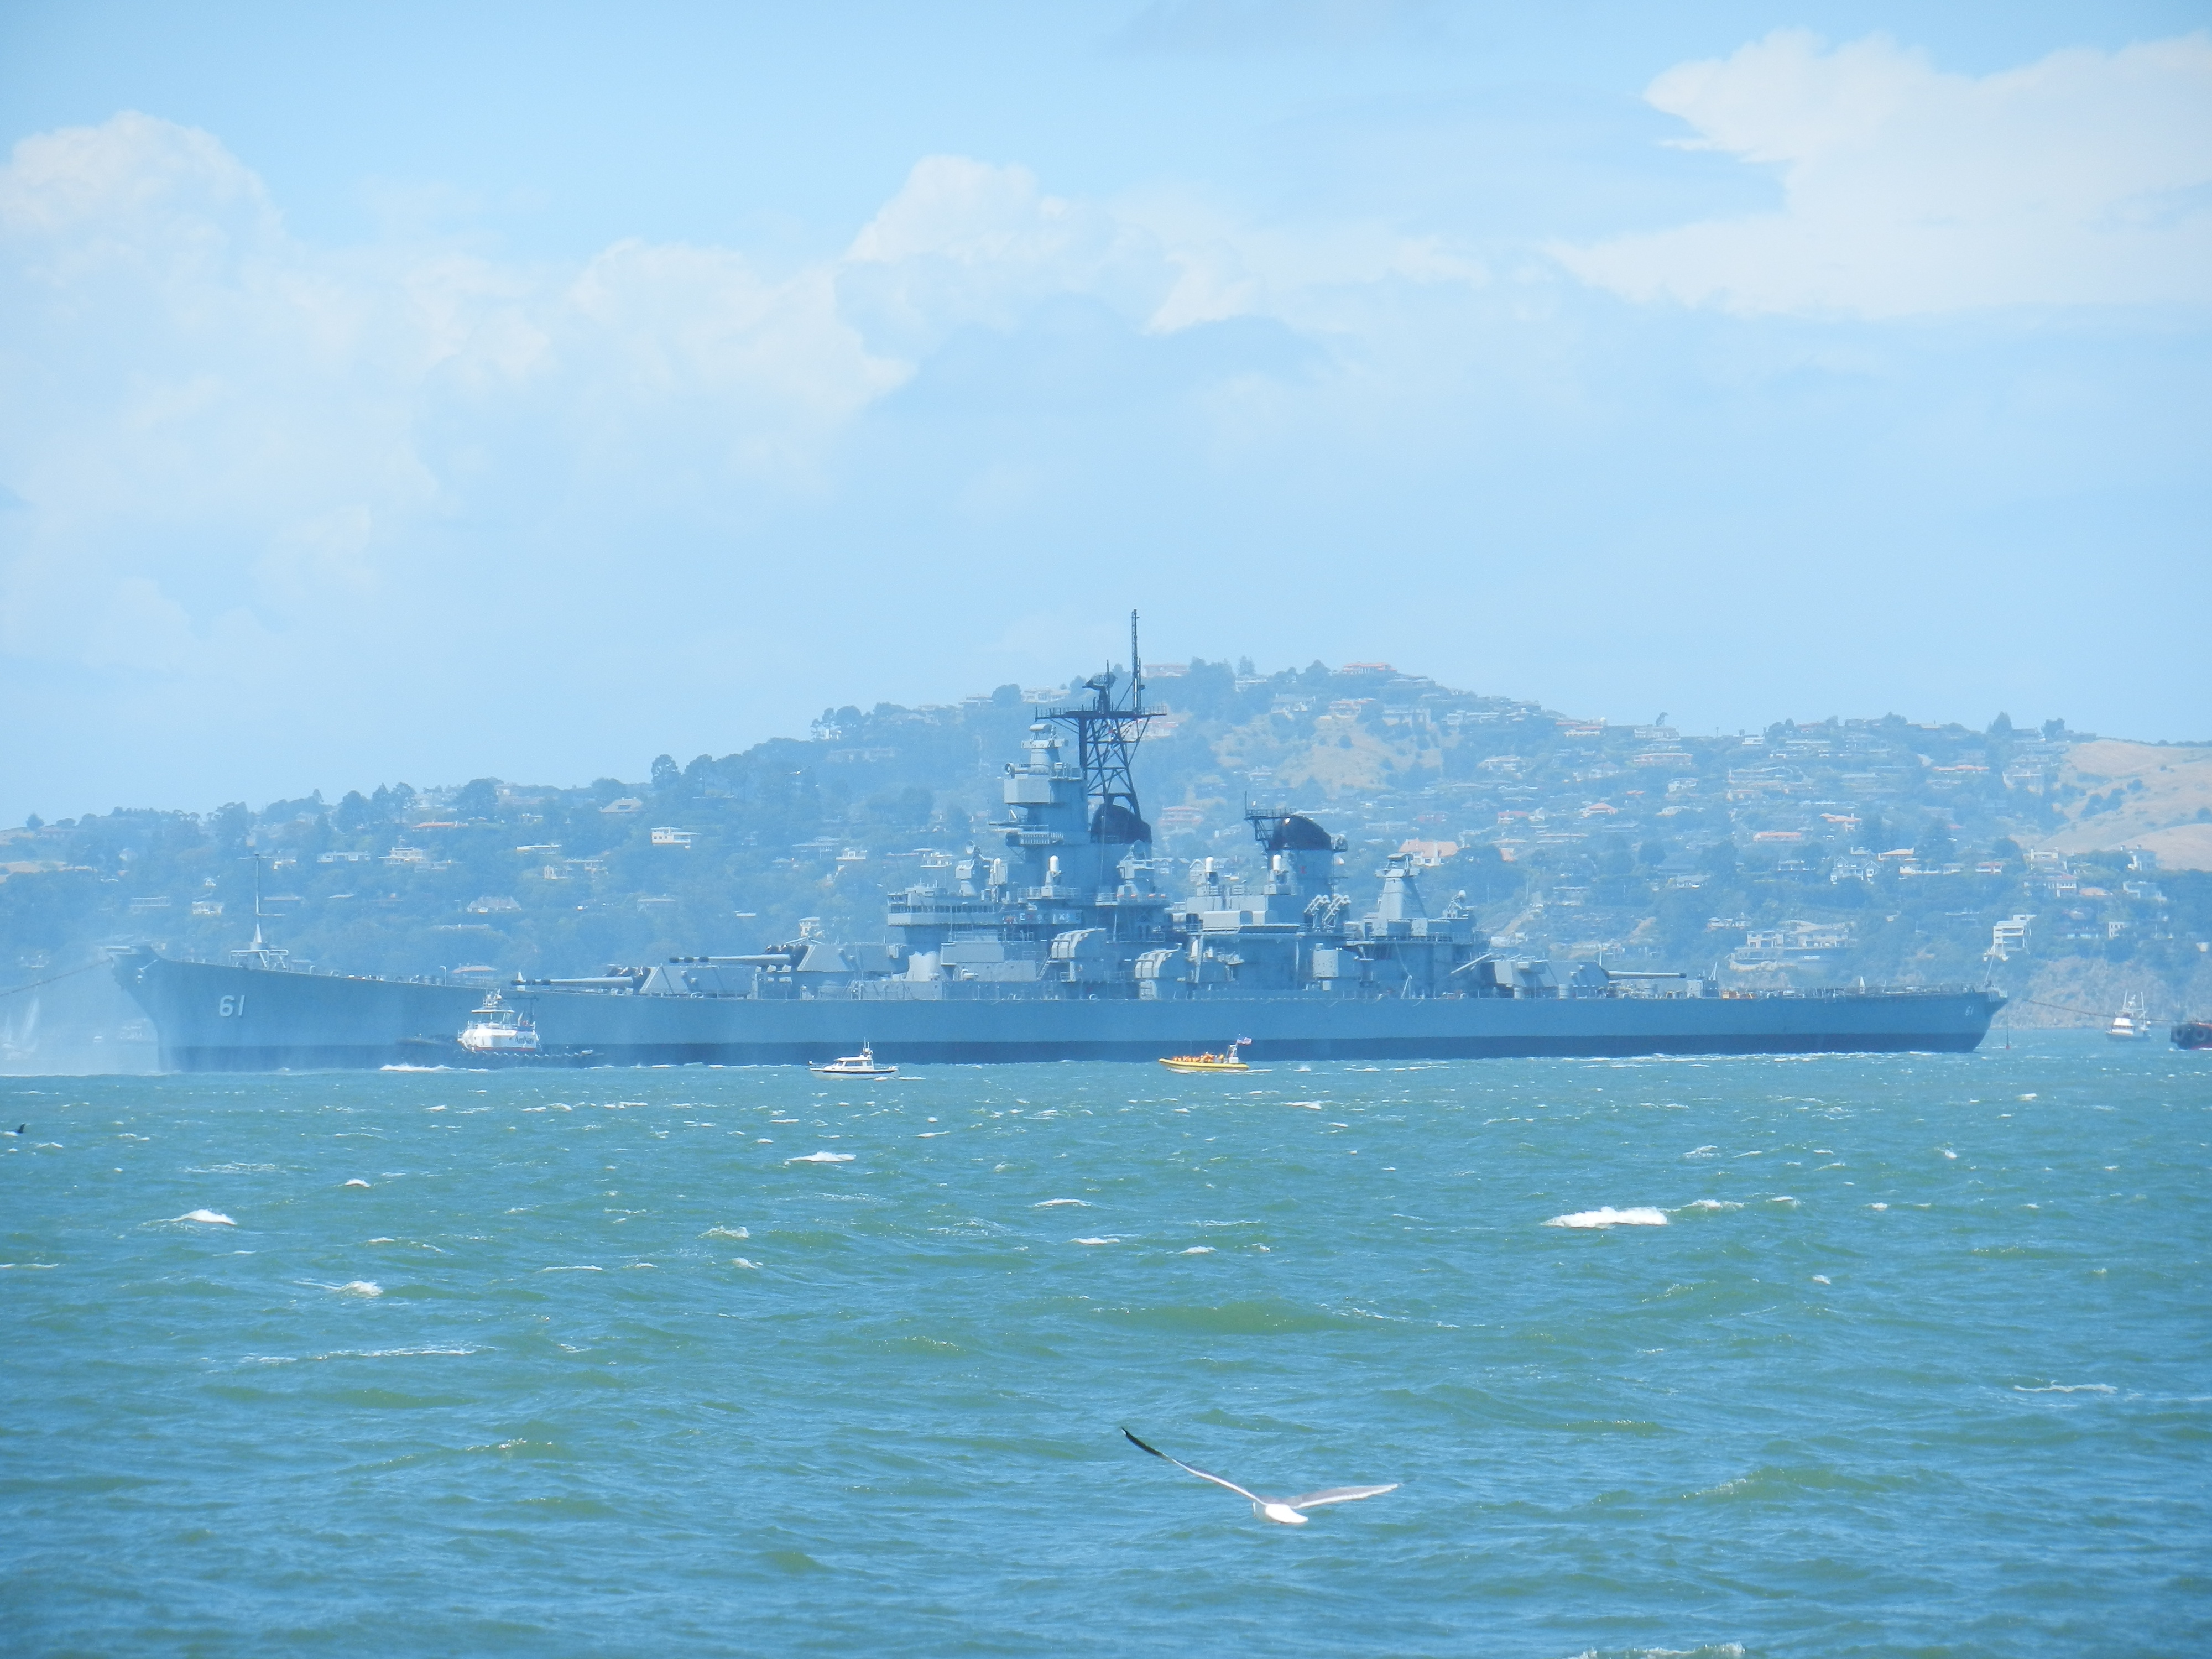 Uss Iowa With The North Bay In Background